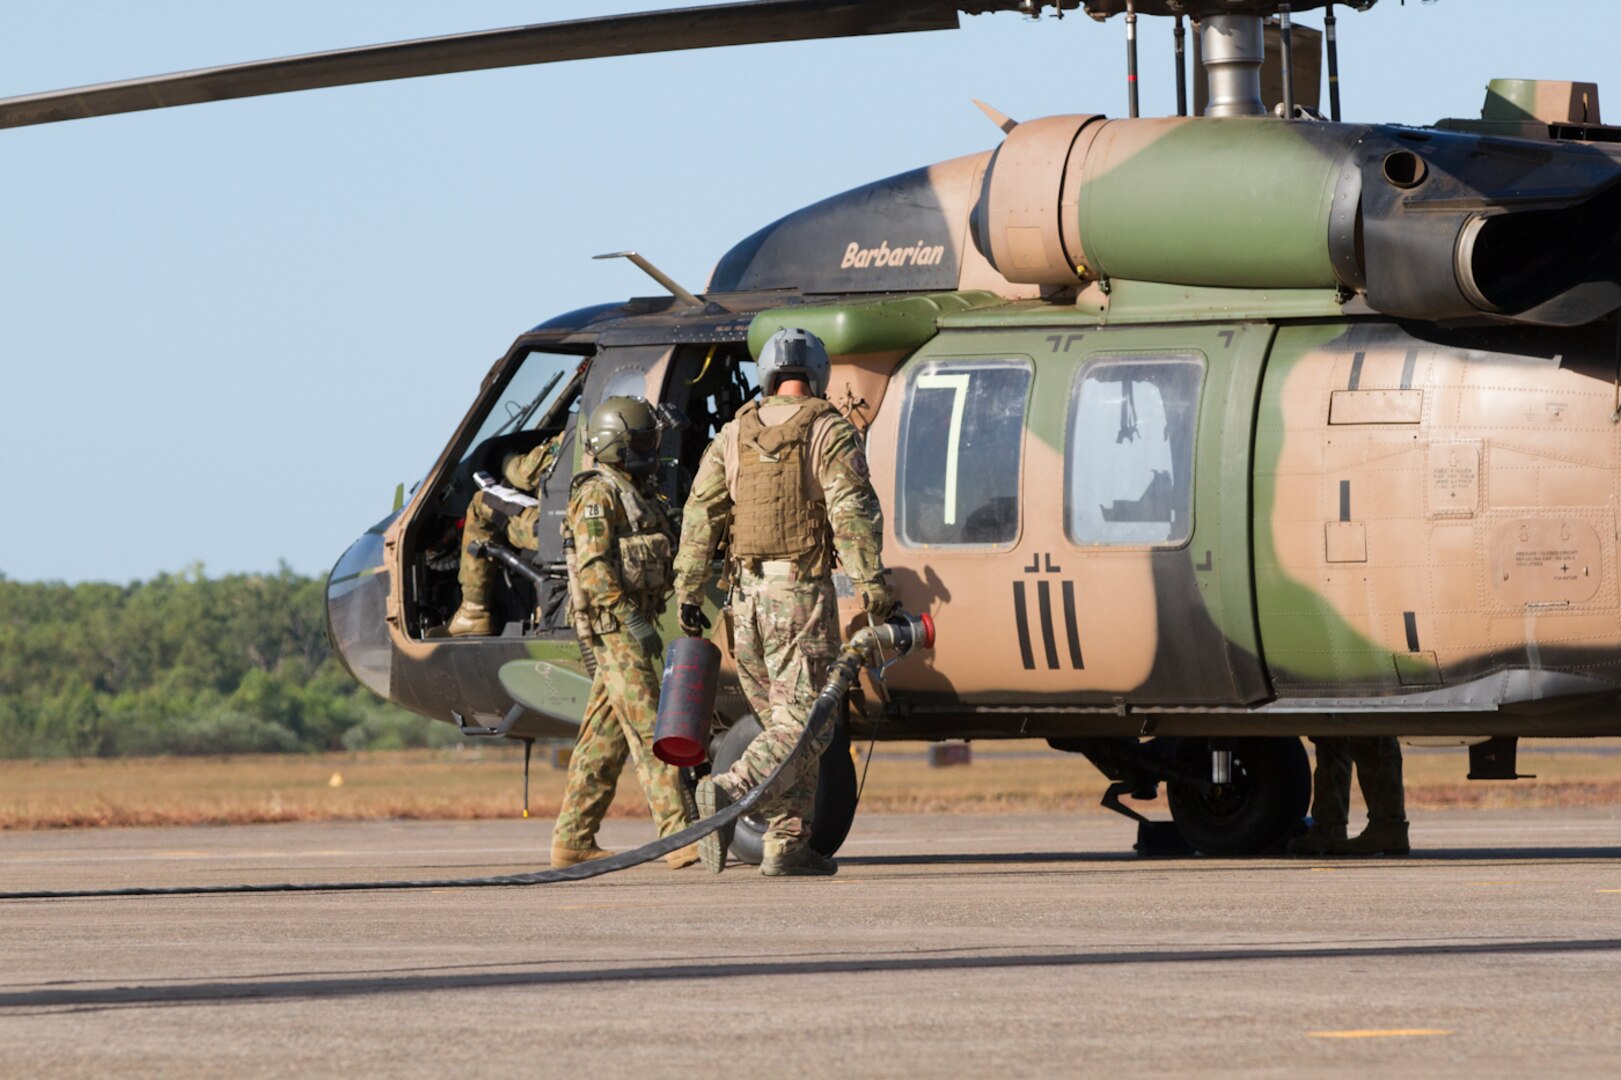 United States Airmen from the 18th Logistics Readiness Squadron from Kadena Air Base, Japan, partnered with the Australian Army during a refueling exercise at the Royal Australian Air Force Base Darwin, July 8 in Darwin, Australia, during Talisman Sabre 2015. Talisman Sabre is a biennial exercise that provides an invaluable opportunity for nearly 30,000 U.S. and Australian defense forces to conduct operations in a combined, joint and interagency environment that will increase both countries’ ability to plan and execute a full range of operations from combat missions to humanitarian assistance efforts.